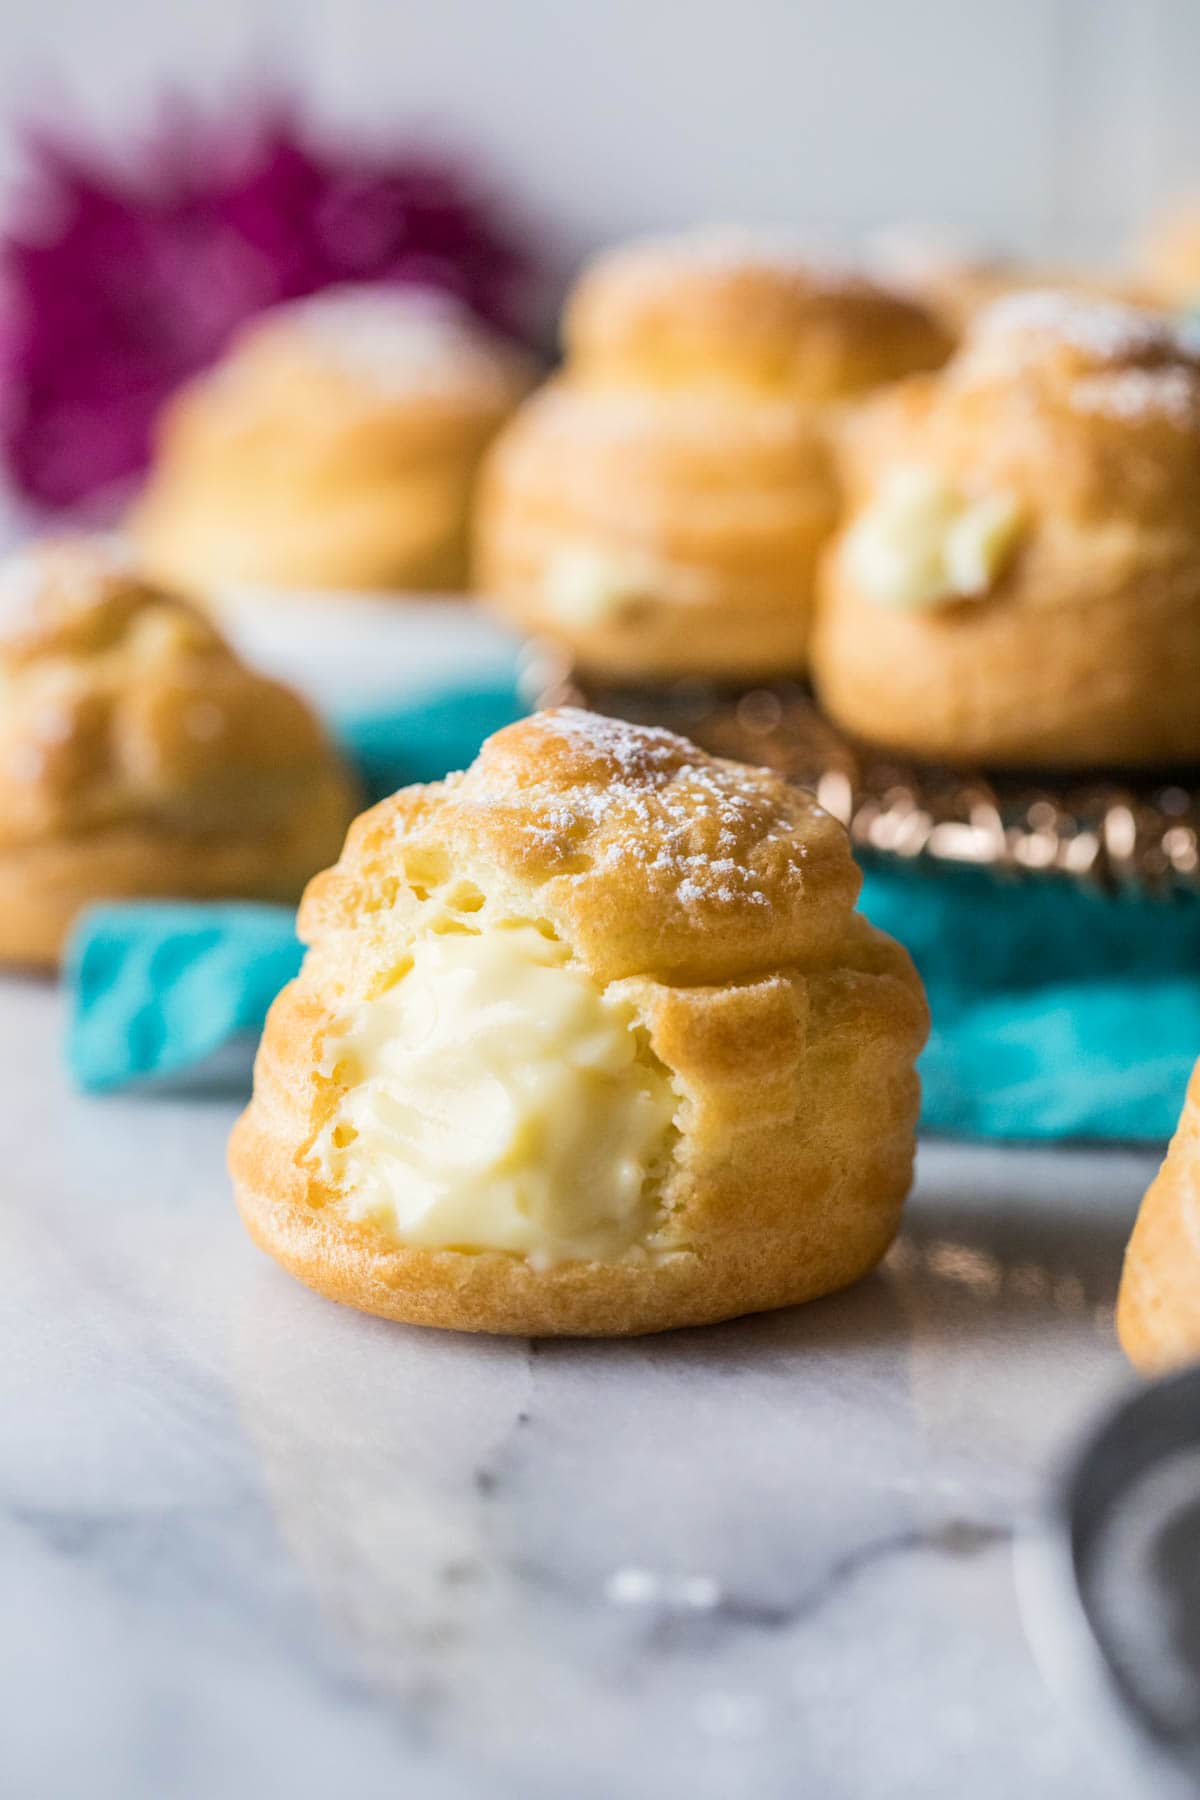 Round, custard-filled choux pastry topped with powdered sugar.